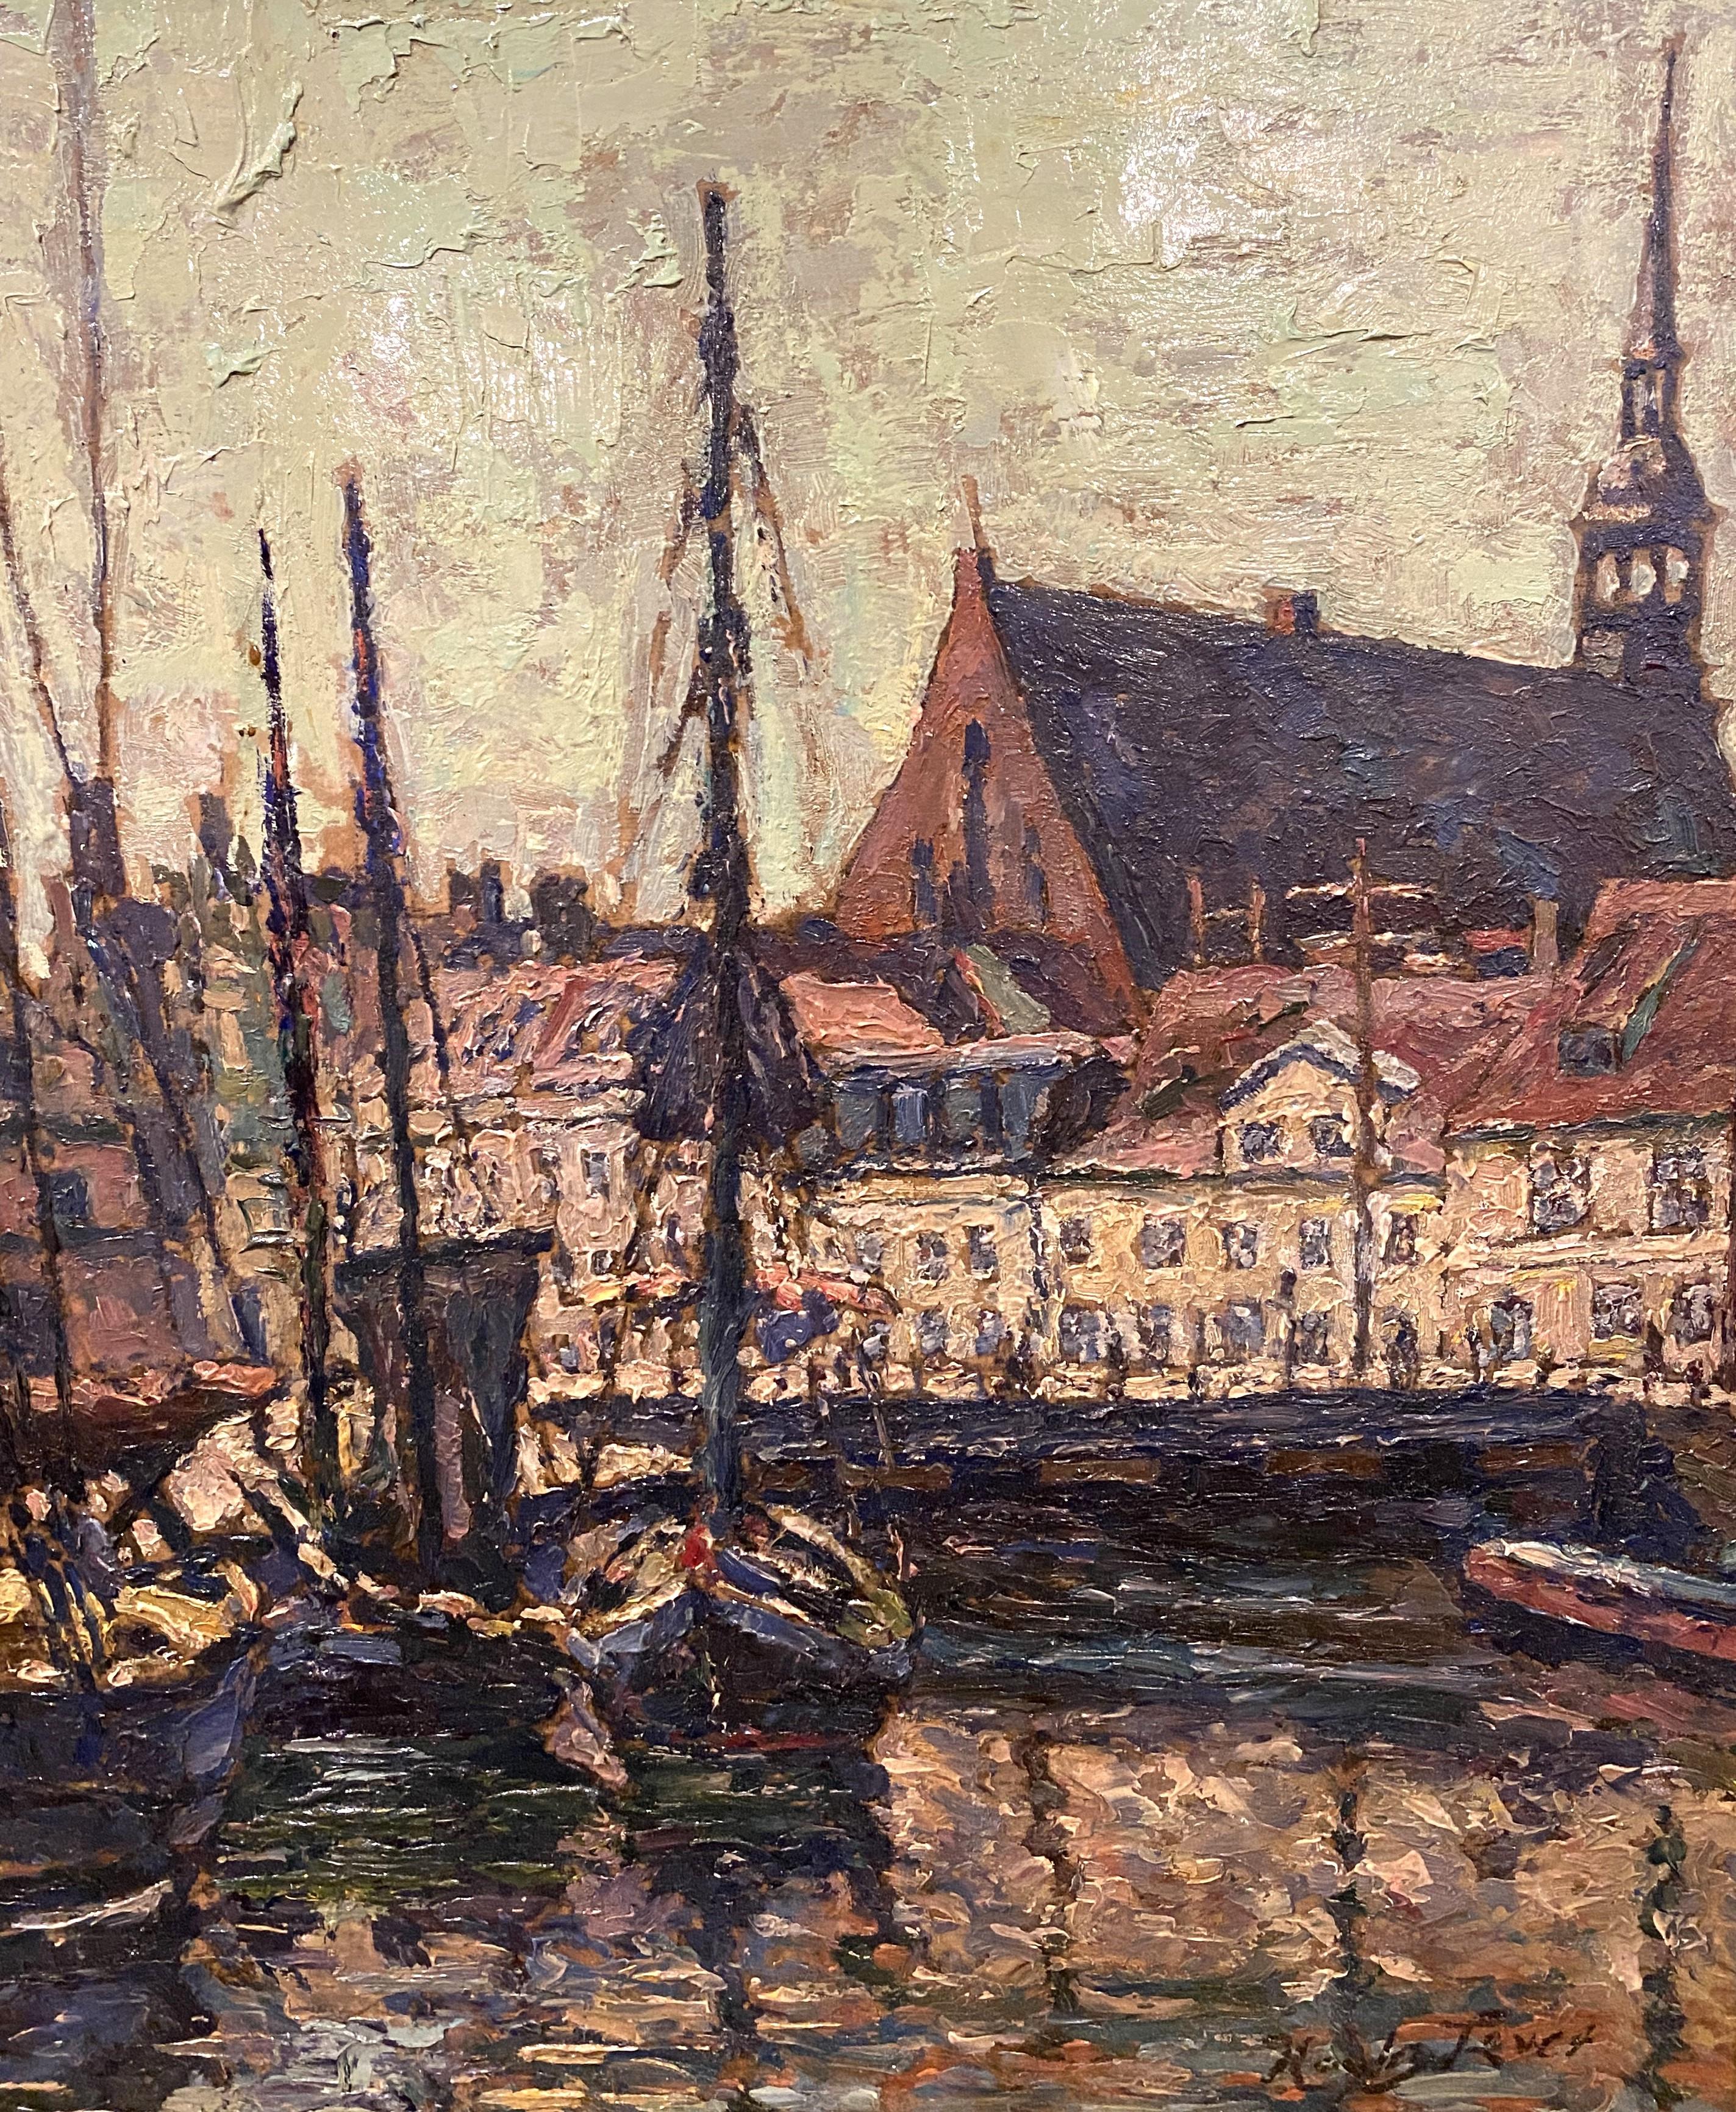 A fine impressionist oil marine harbor scene painting  by Australian American artist Hayley Lever (1876-1958). Lever was born in Adelaide, Australia and studied first at the Adelaide’s Prince Alfred College and later attended James Ashton’s Academy